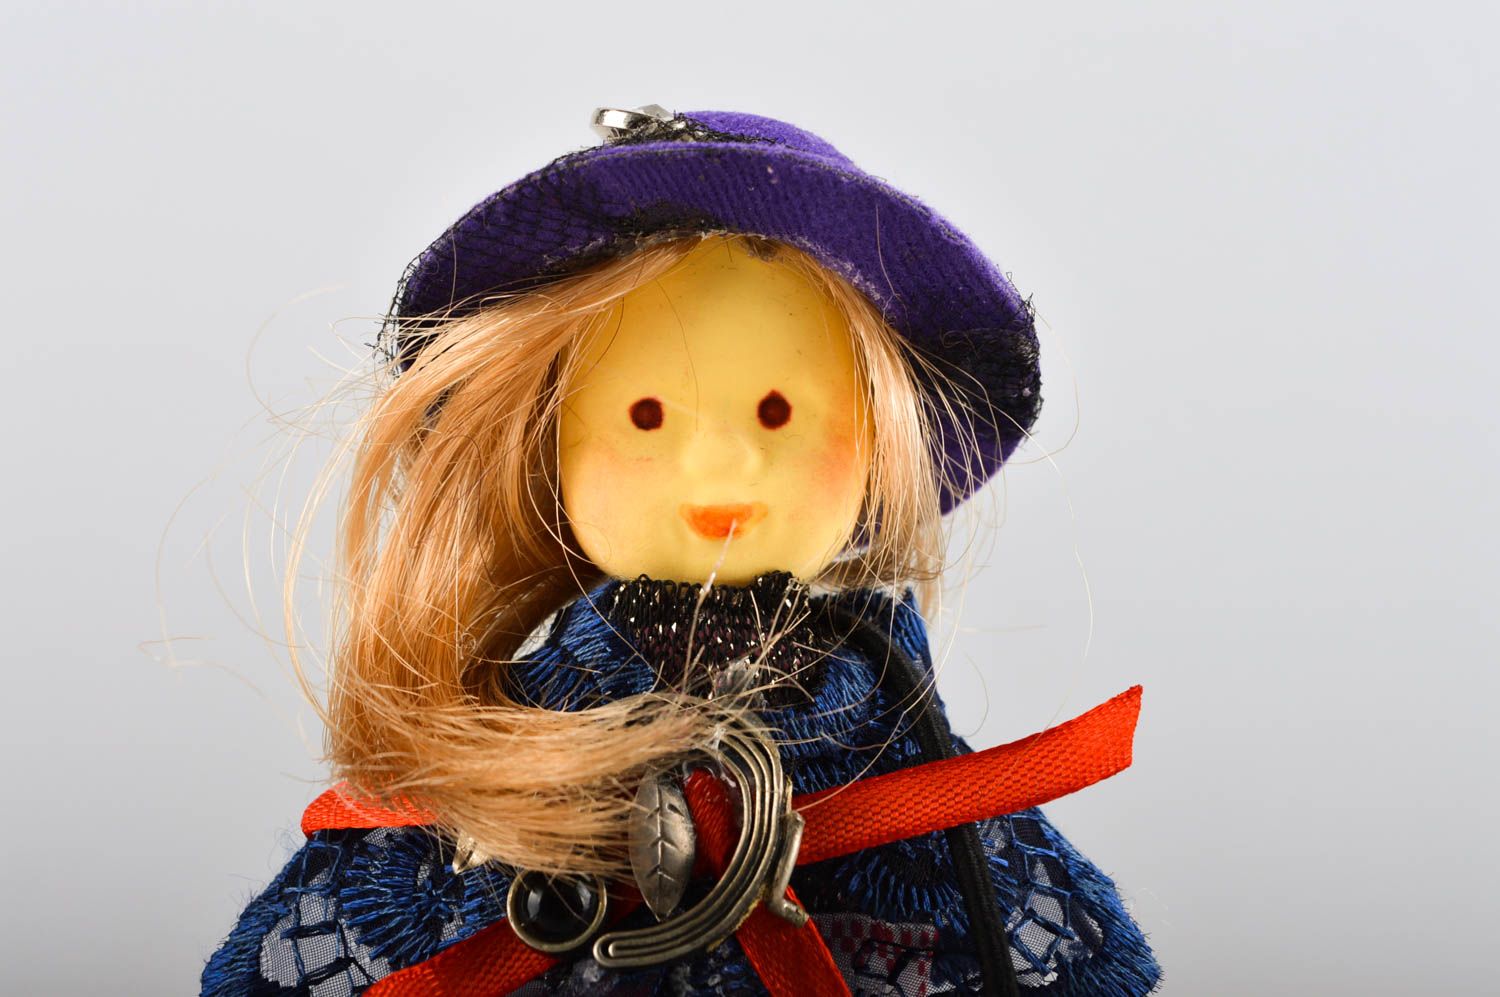 Stylish handmade interior toy rag doll collectible dolls decorative use only photo 3